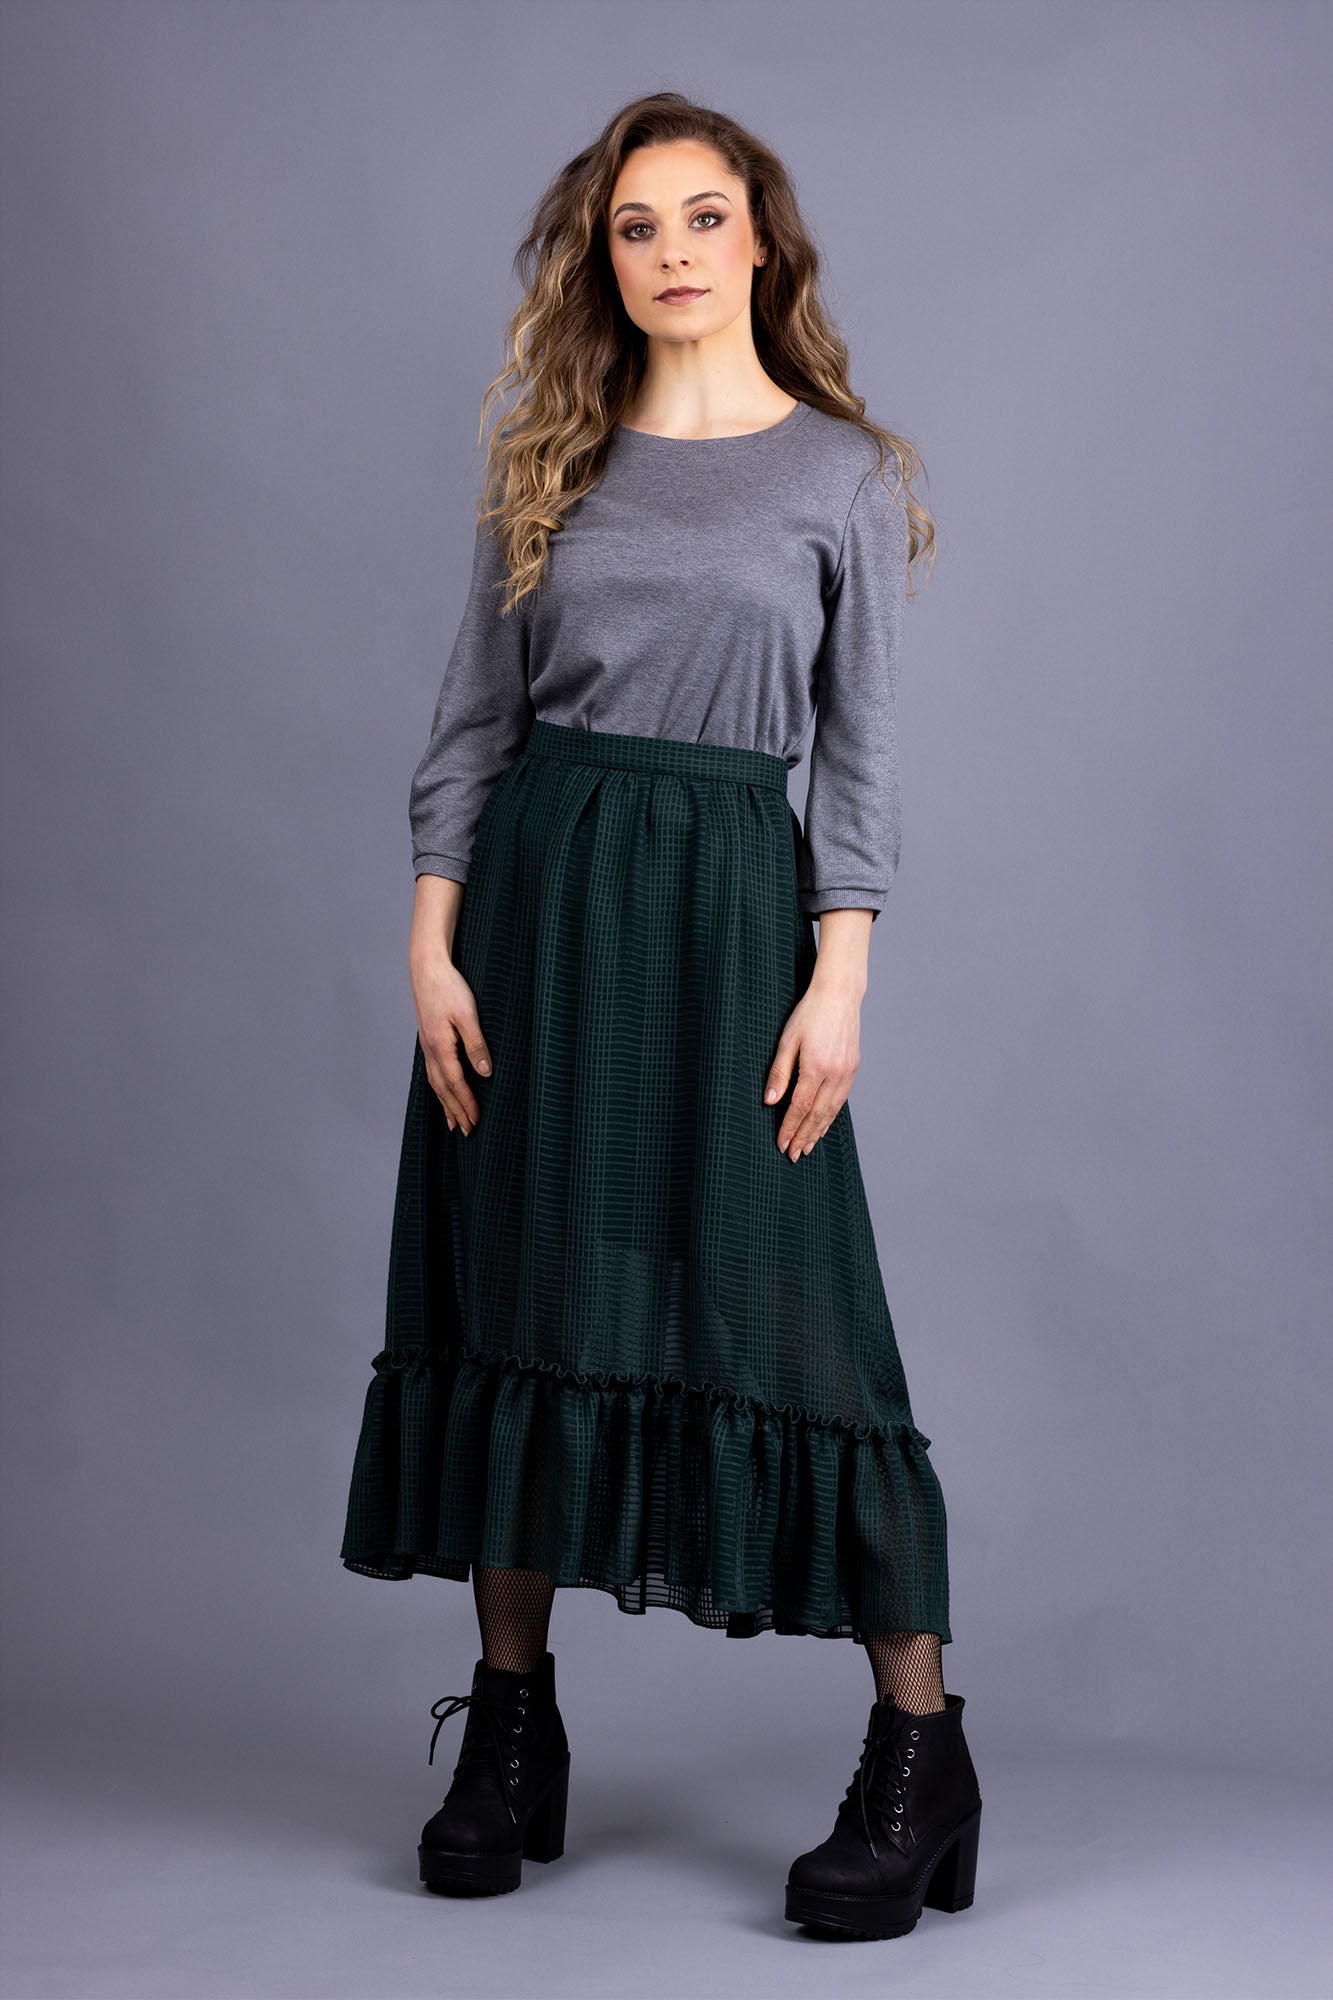 Forget-Me-Not Ella long skirt pattern in bottle green, worn with Iris pleated tee, full-length front view